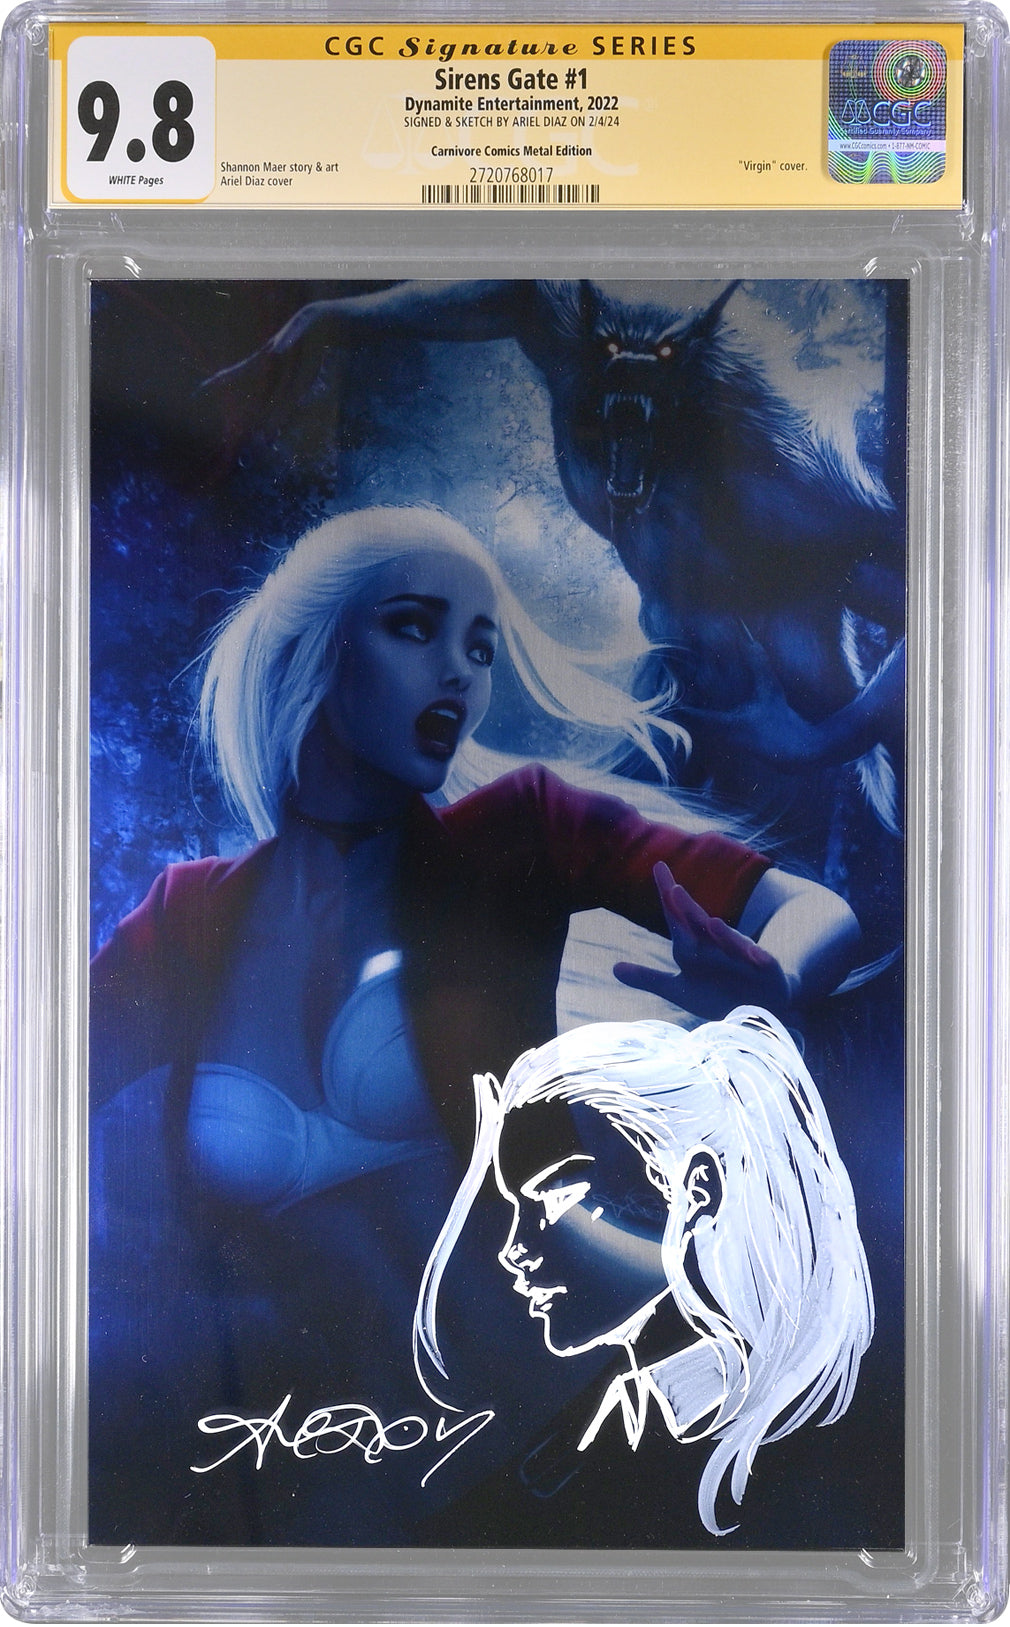 Sirens Gate #1 (Metal Edition) CGC SS 9.8 Signed/Sketched by Ariel Diaz | Slab of The Day – April 4